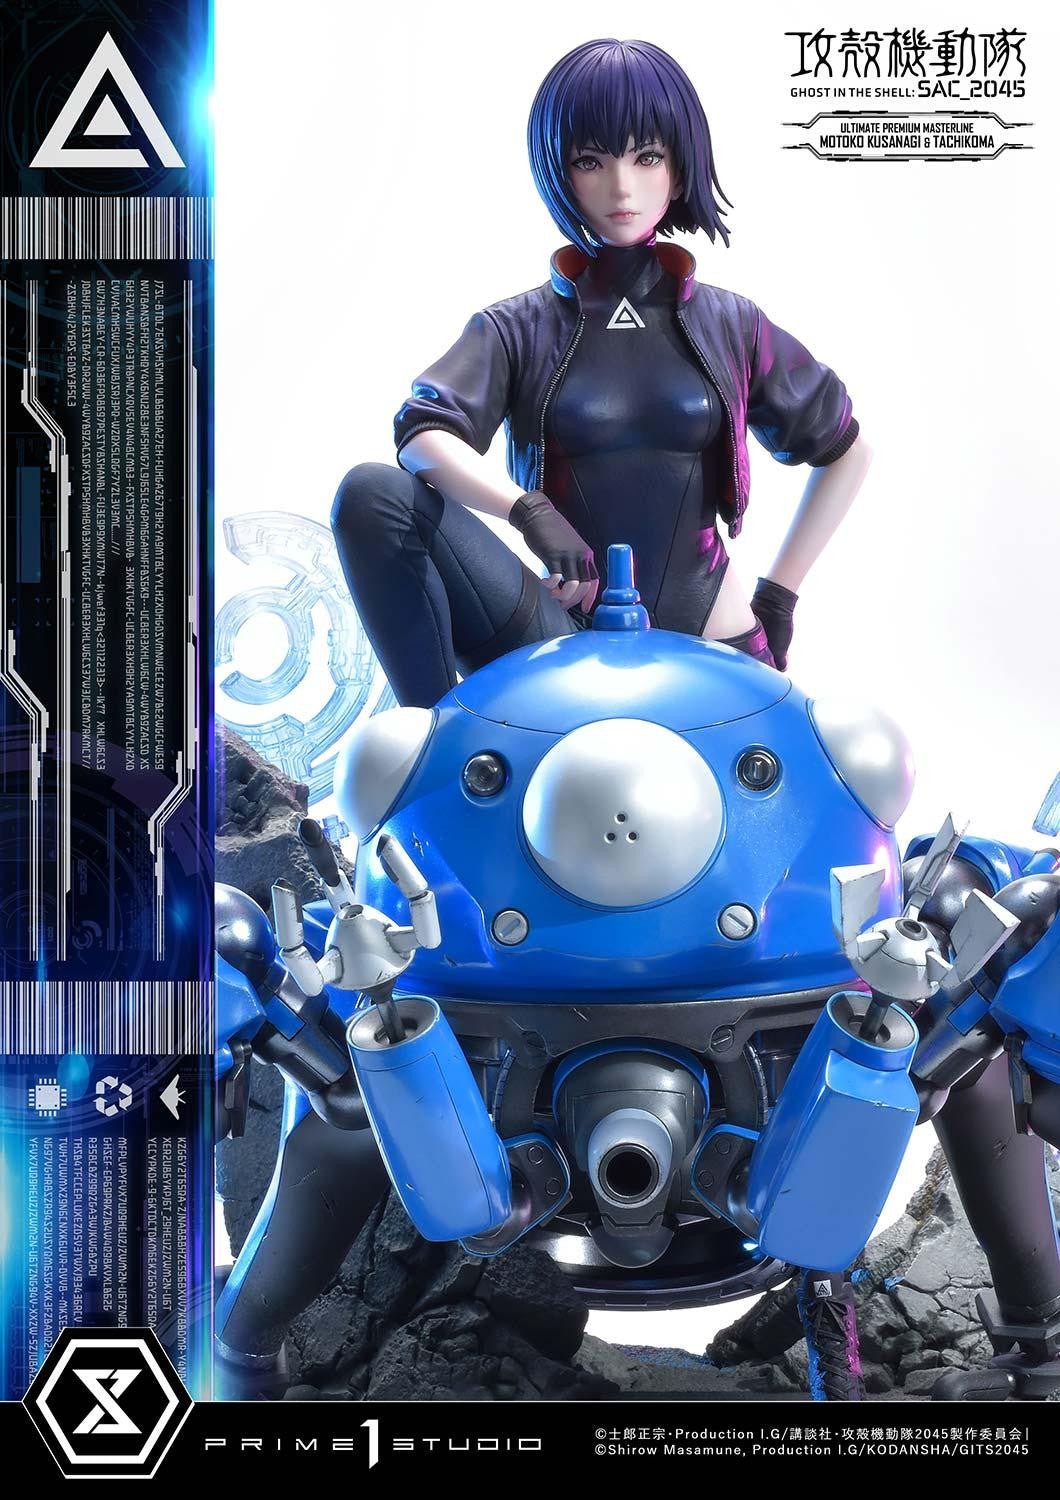 Ghost in a Shell… Motoko Kusanagi Figma Action Figure Review